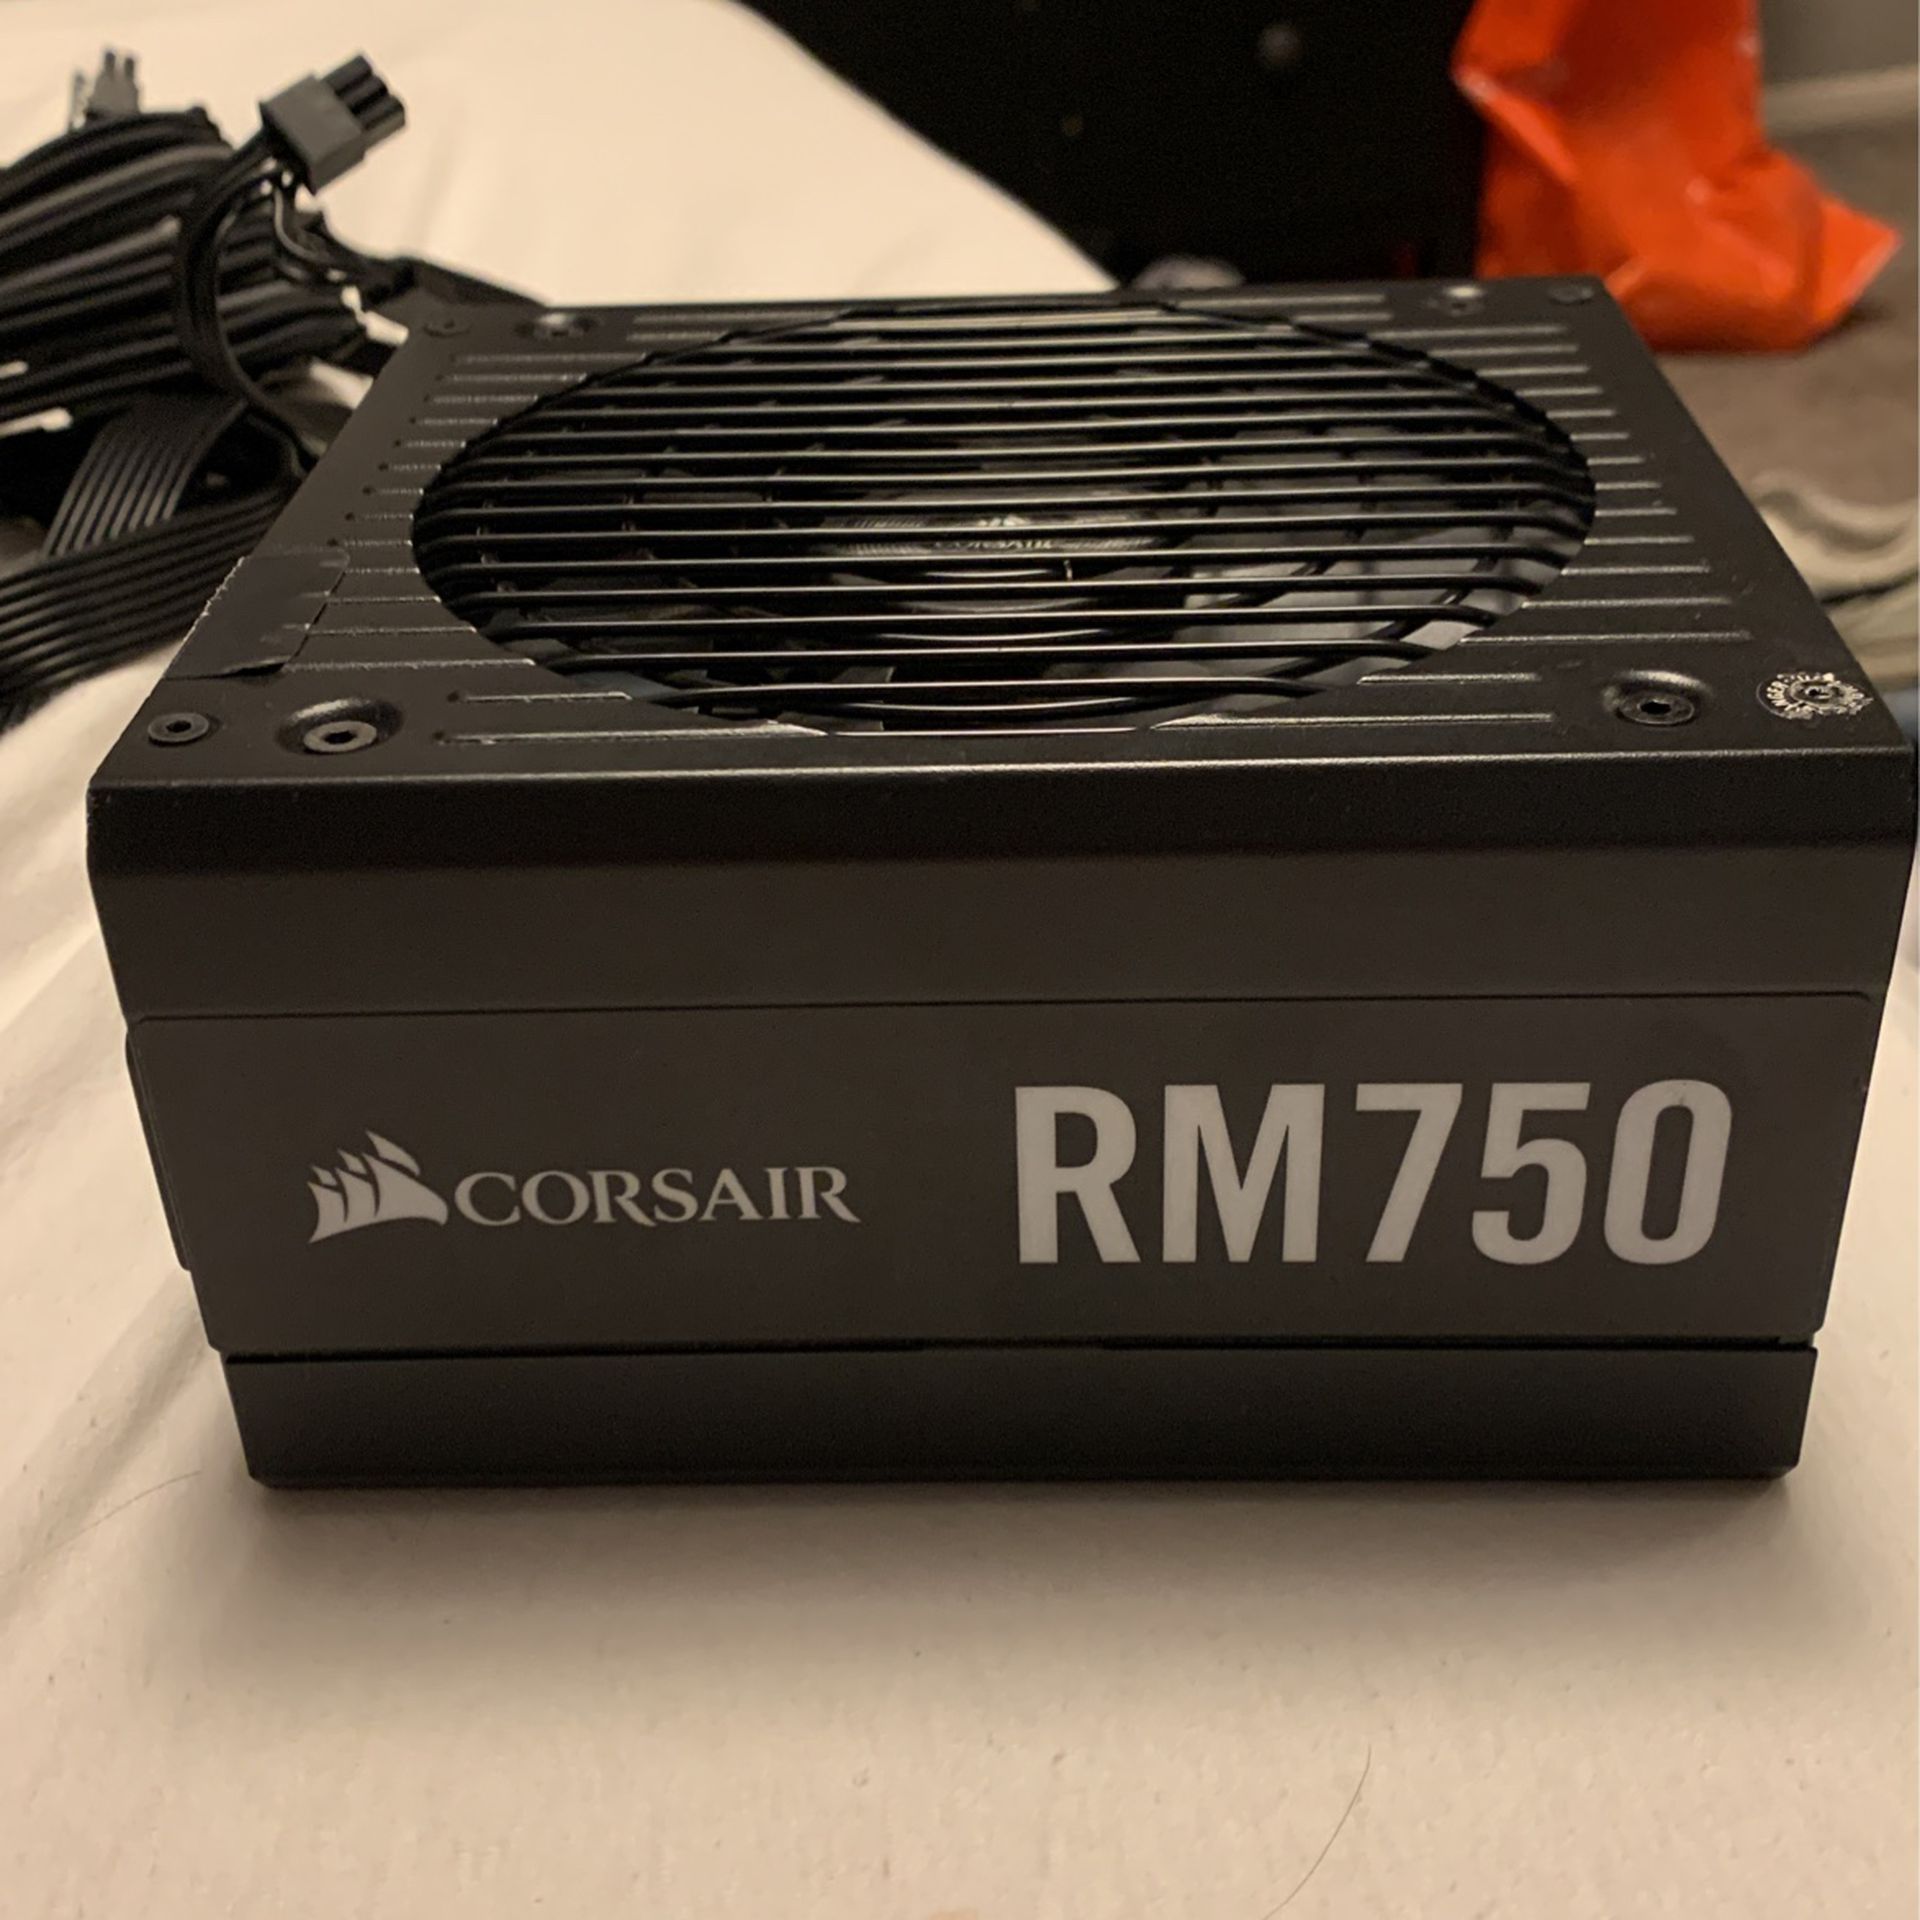 har mens Perseus Corsair RM 750 Power Supply for Sale in Vancouver, WA - OfferUp